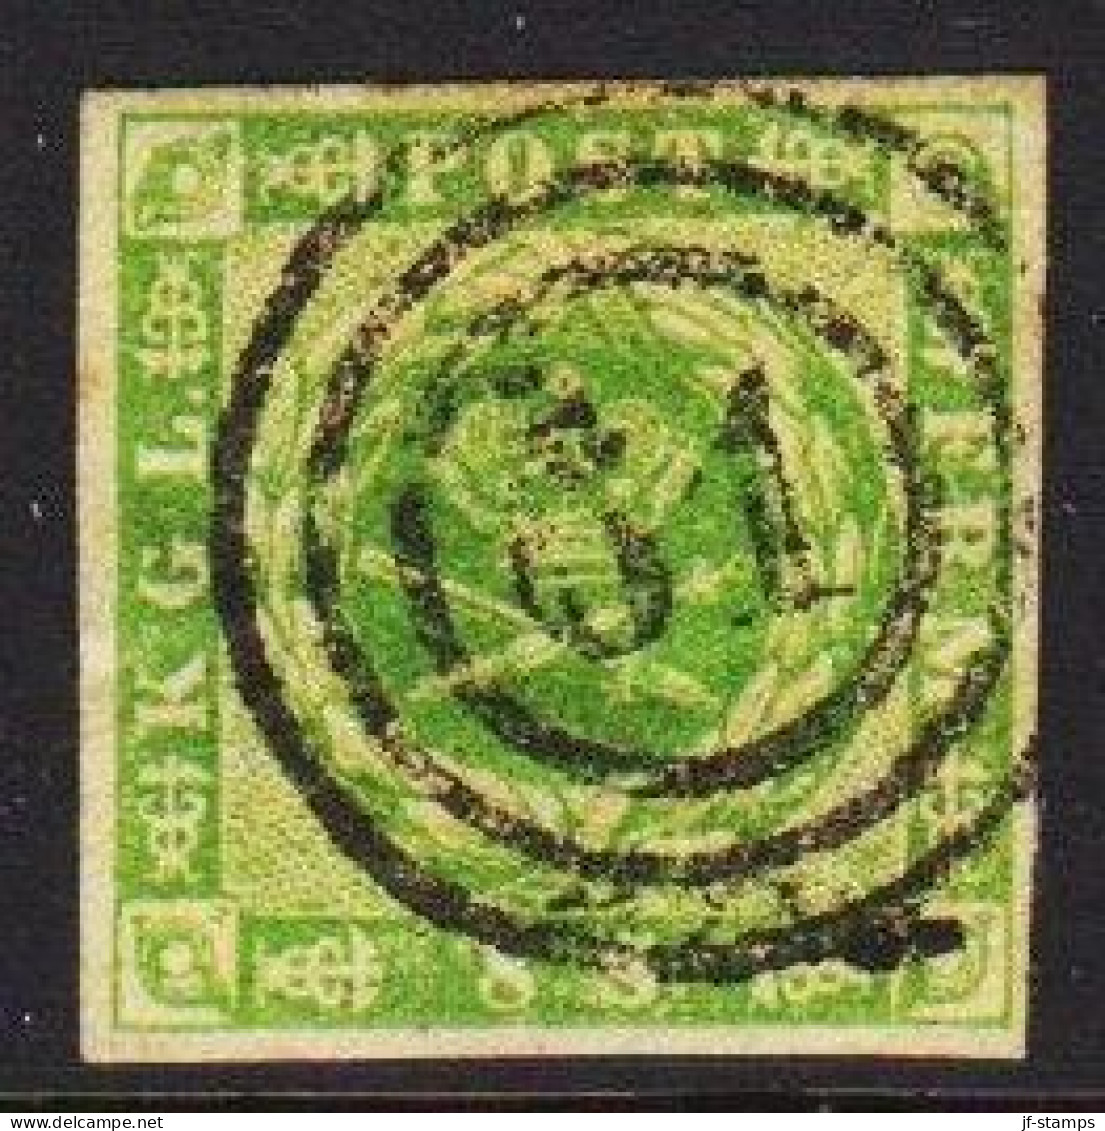 1857. DANMARK. Dotted Spandrels. 8 Skilling Green. Nummeral Cancel 61 - RNNE, Bornholm. Very Fi... (Michel 5) - JF536970 - Used Stamps